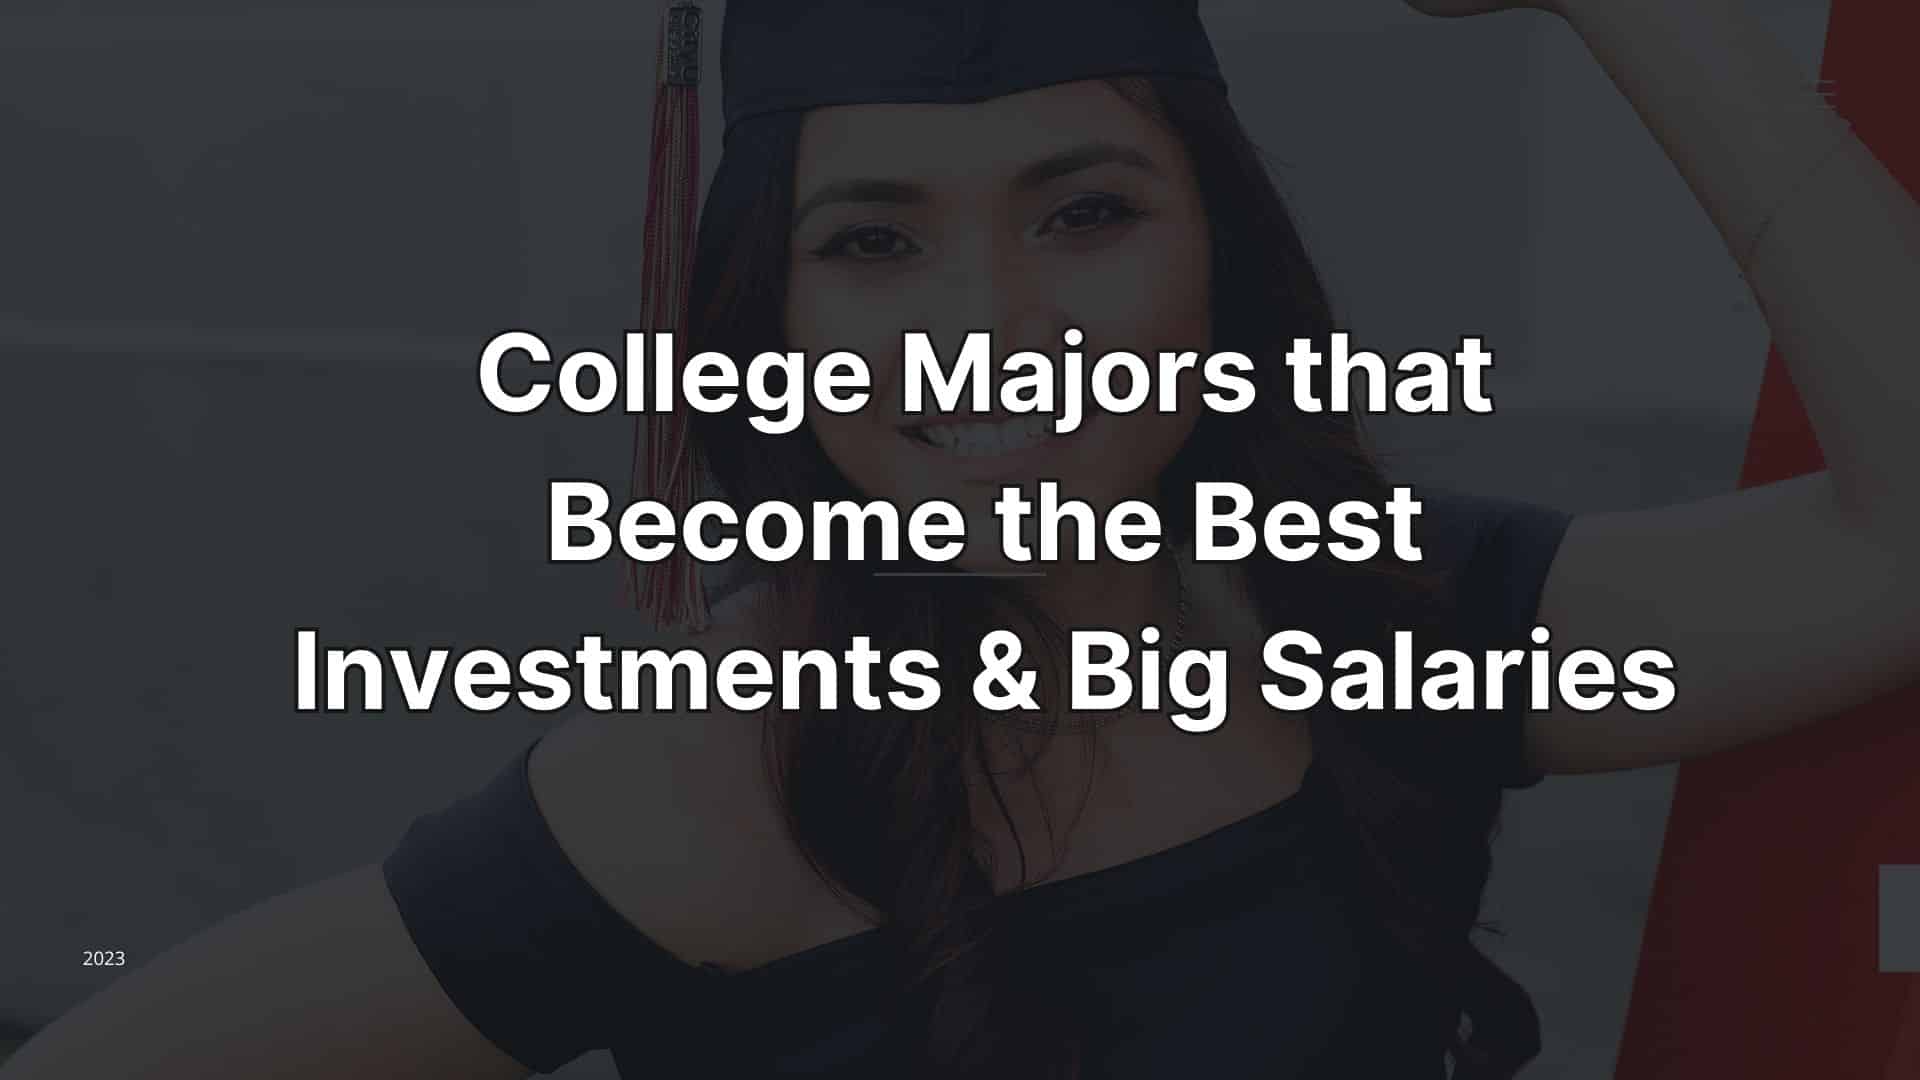 College Majors that Become the Best Investments & Big Salaries